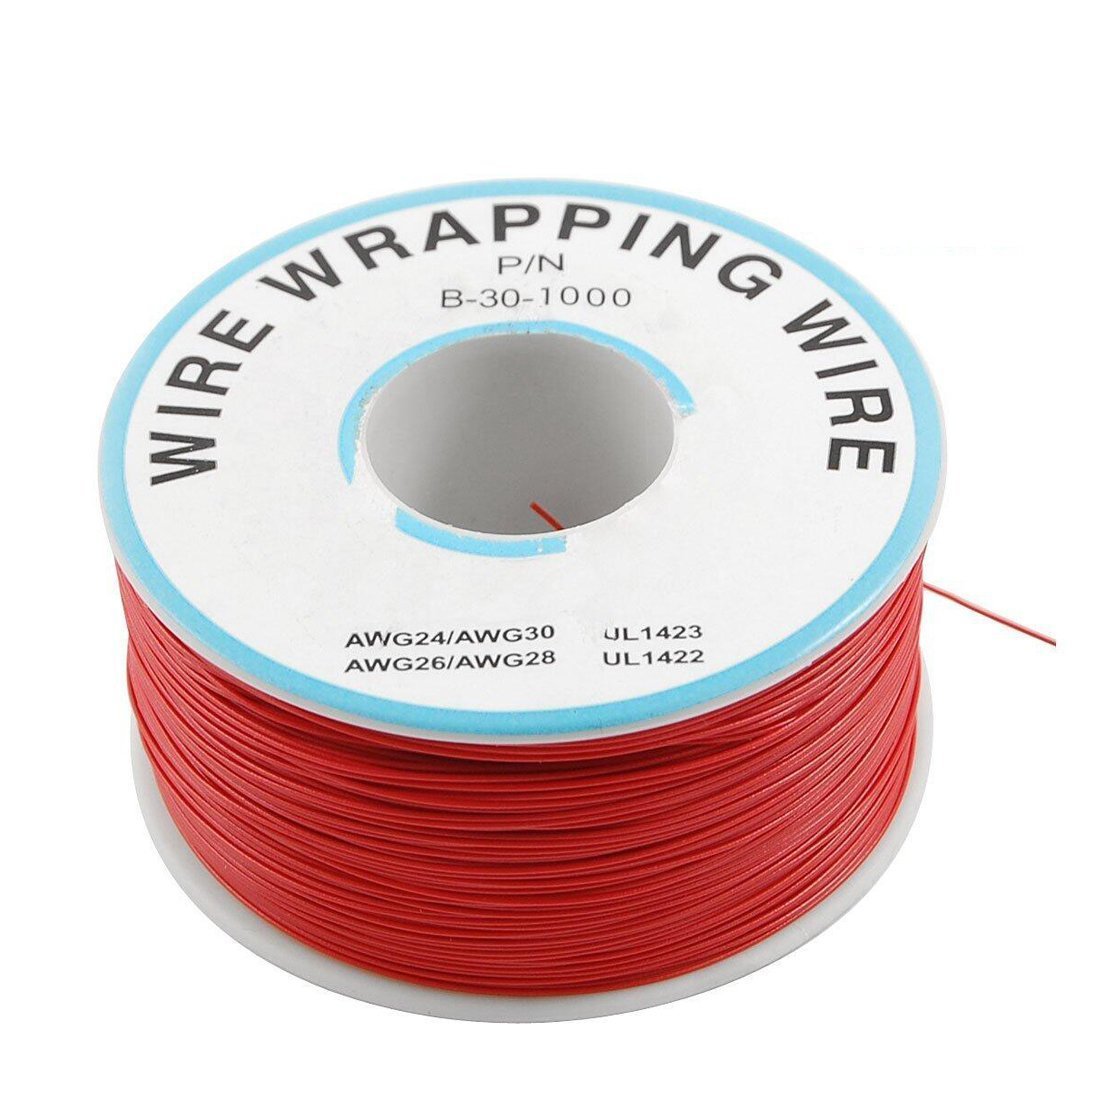 230m-PN-B-30-1000-Insulated-PVC-Coated-30AWG-Wire-Wrapping-Wire-RED-2.jpg